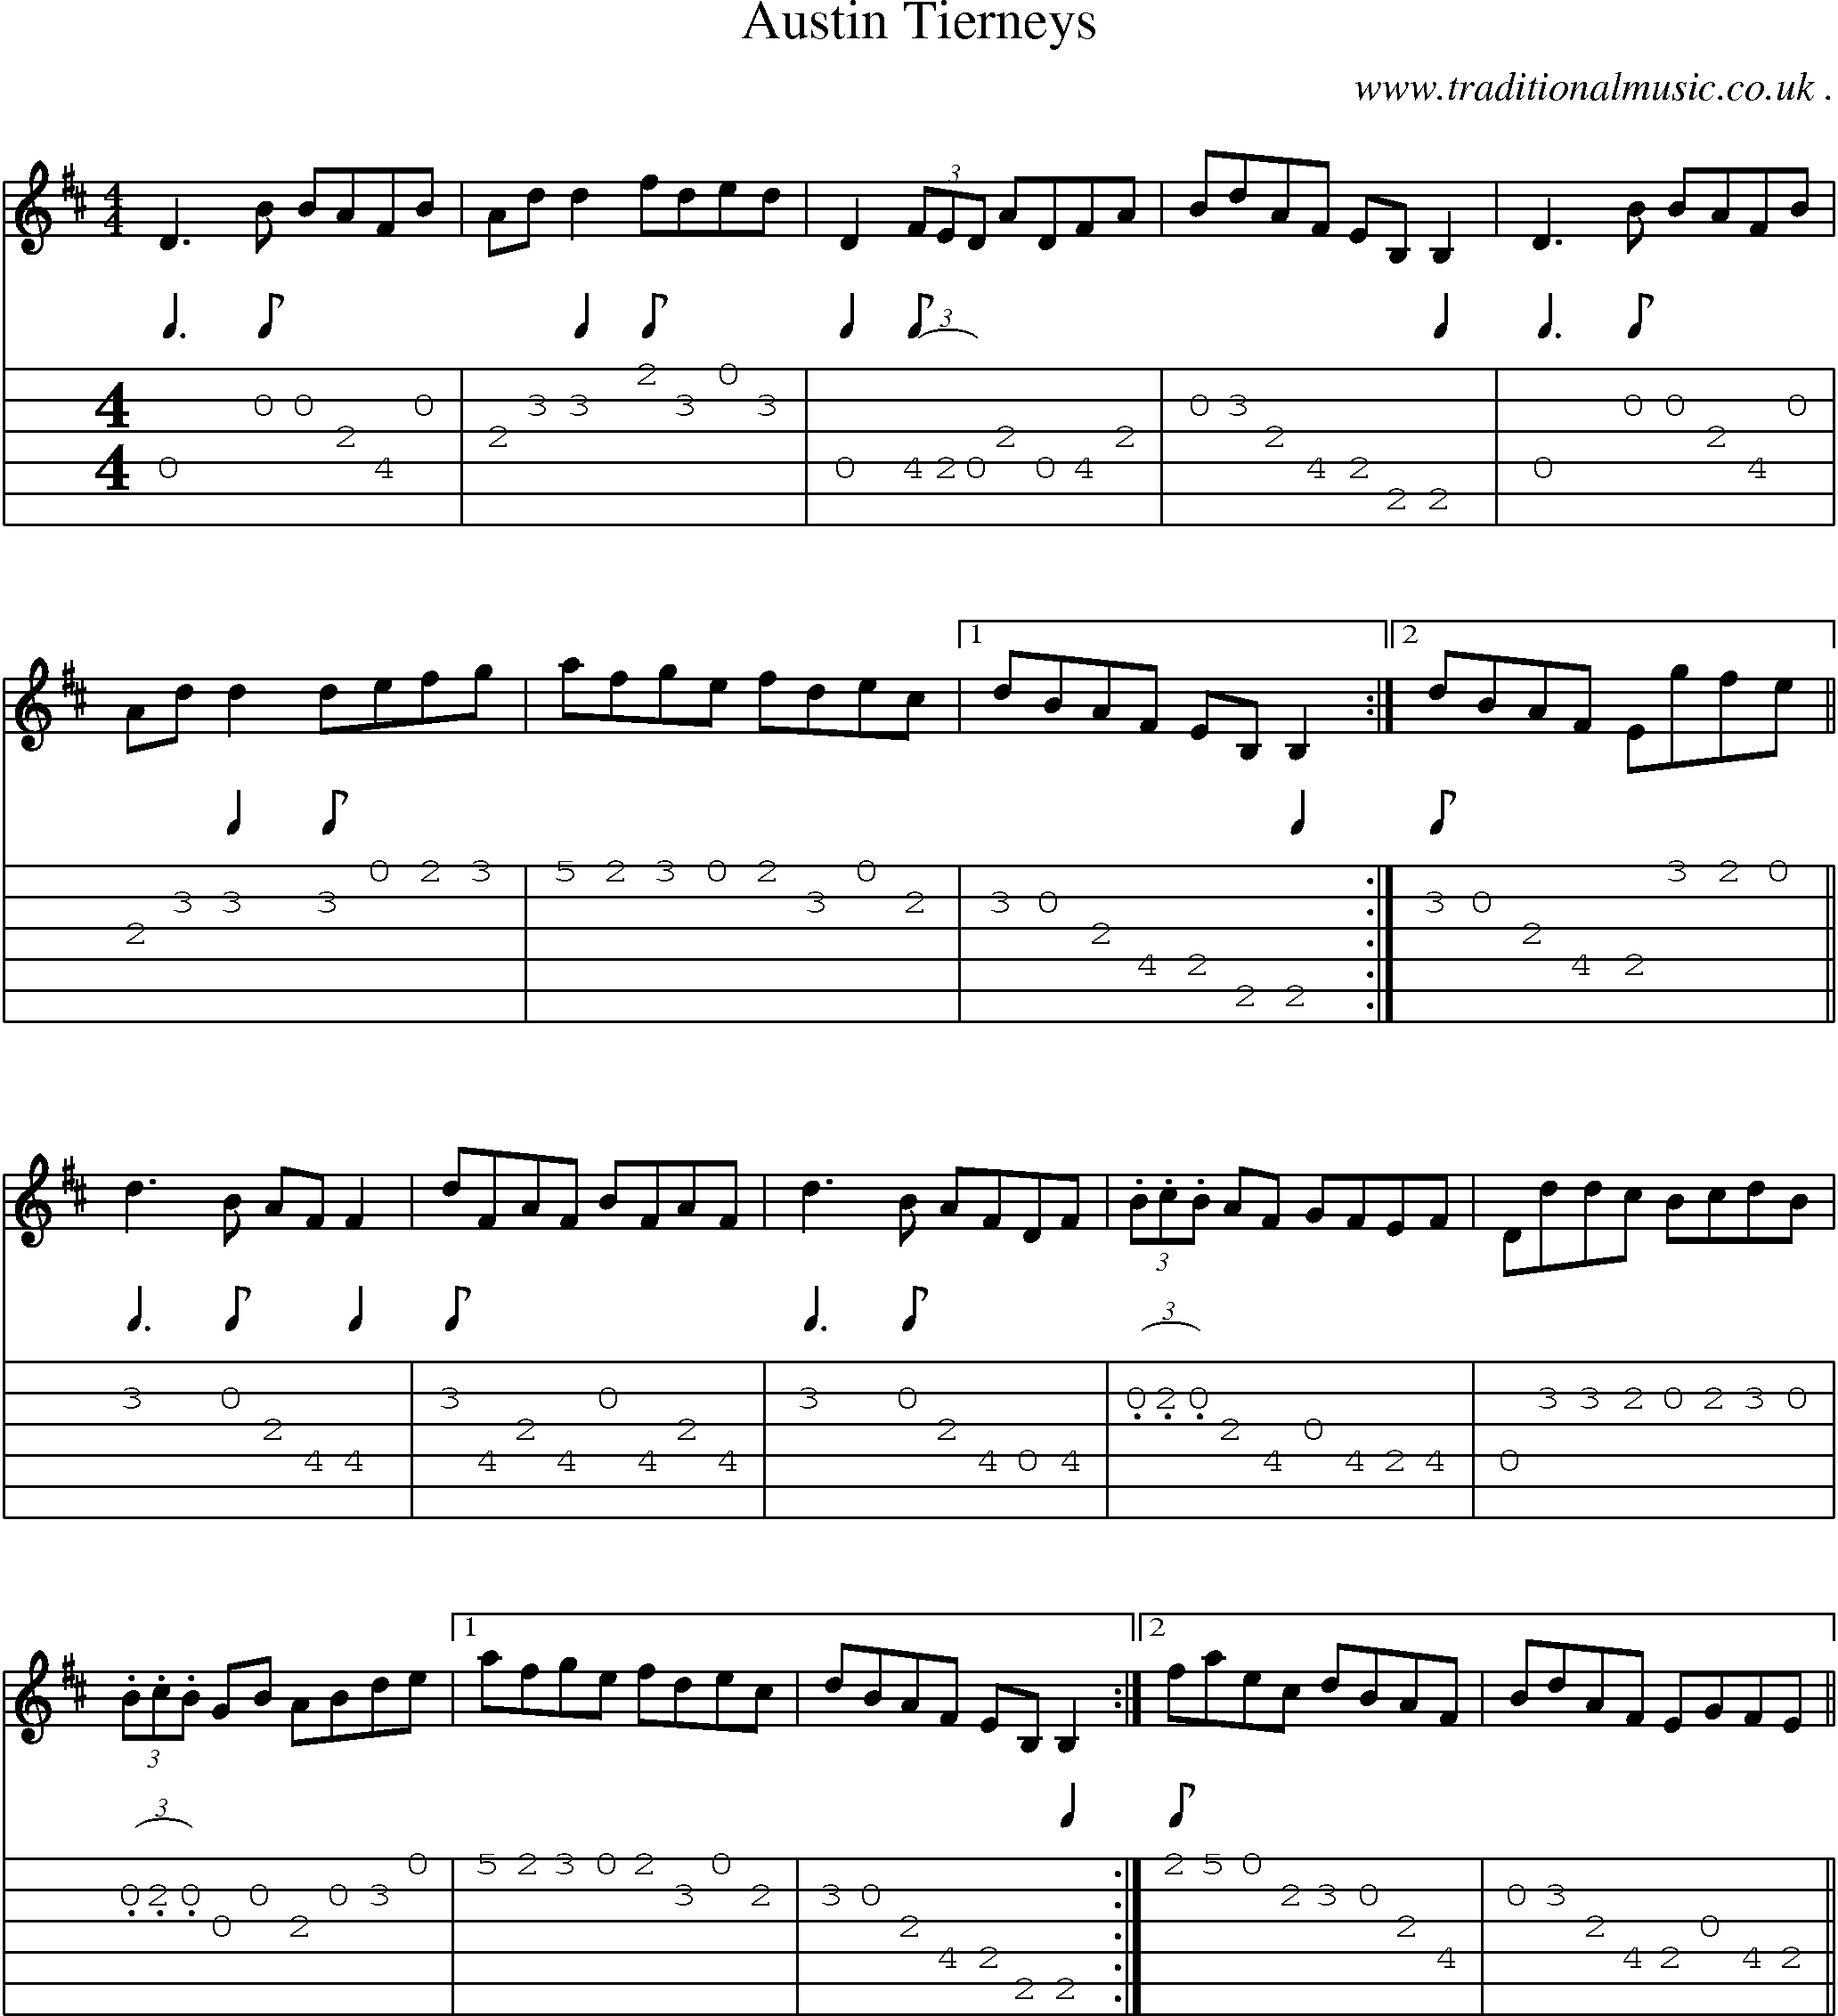 Sheet-Music and Guitar Tabs for Austin Tierneys